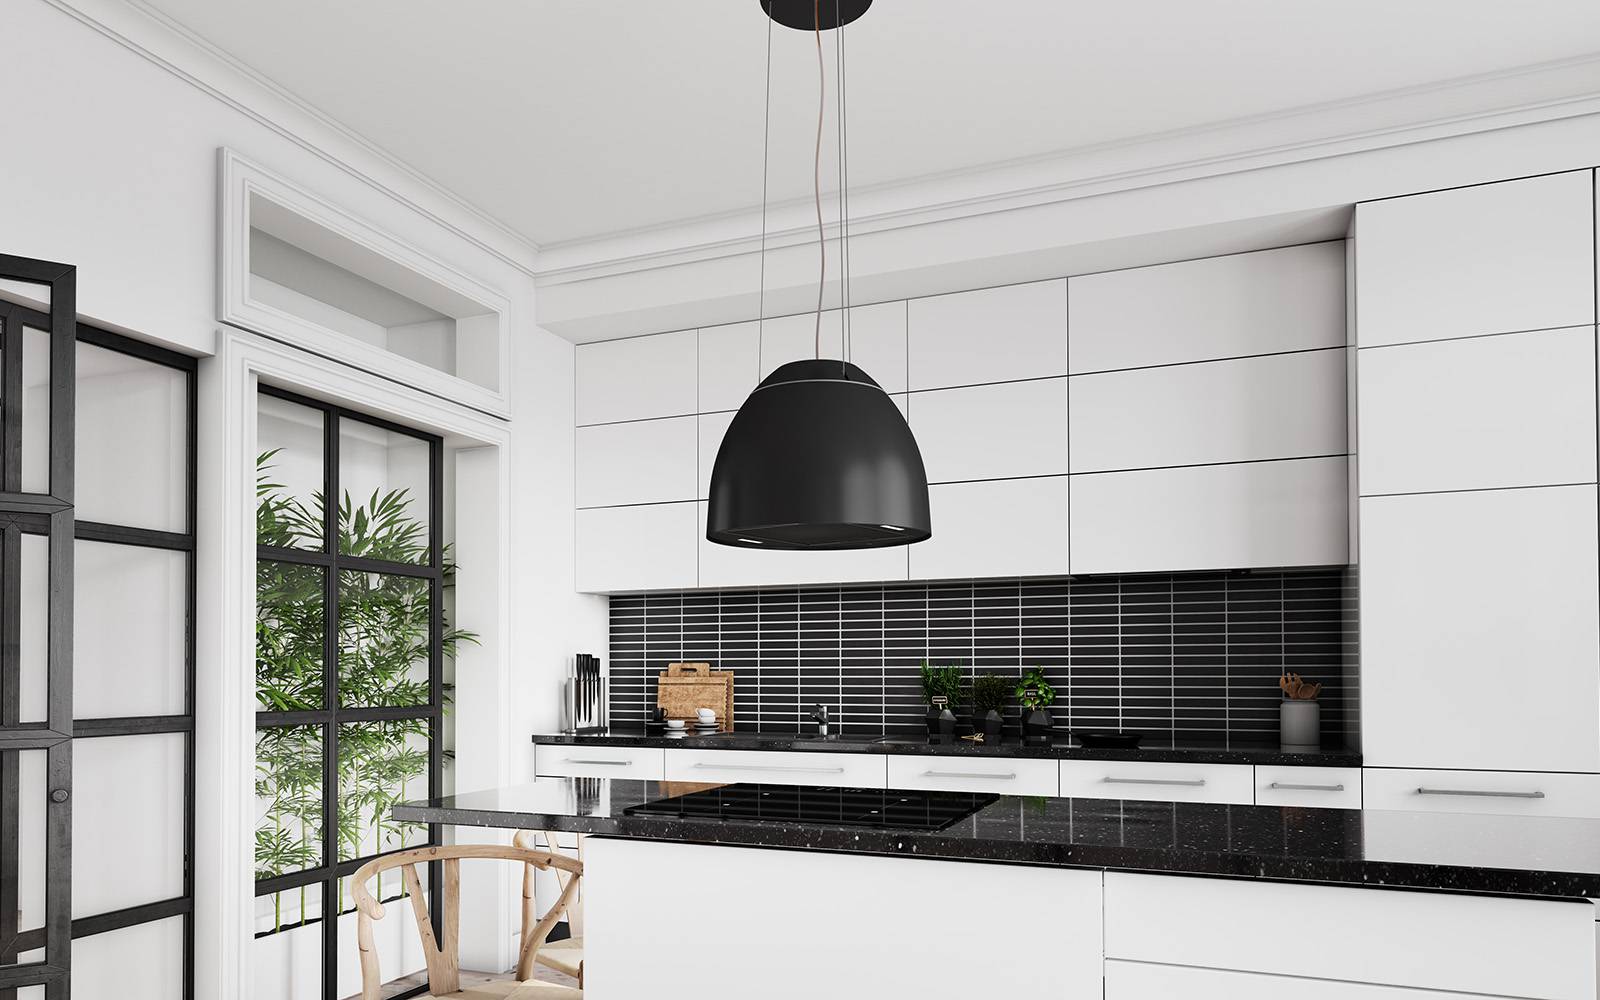 Airforce New Moon 45cm Island Cooker Hood in Complete Black Satin Finish with Slim LED Lights